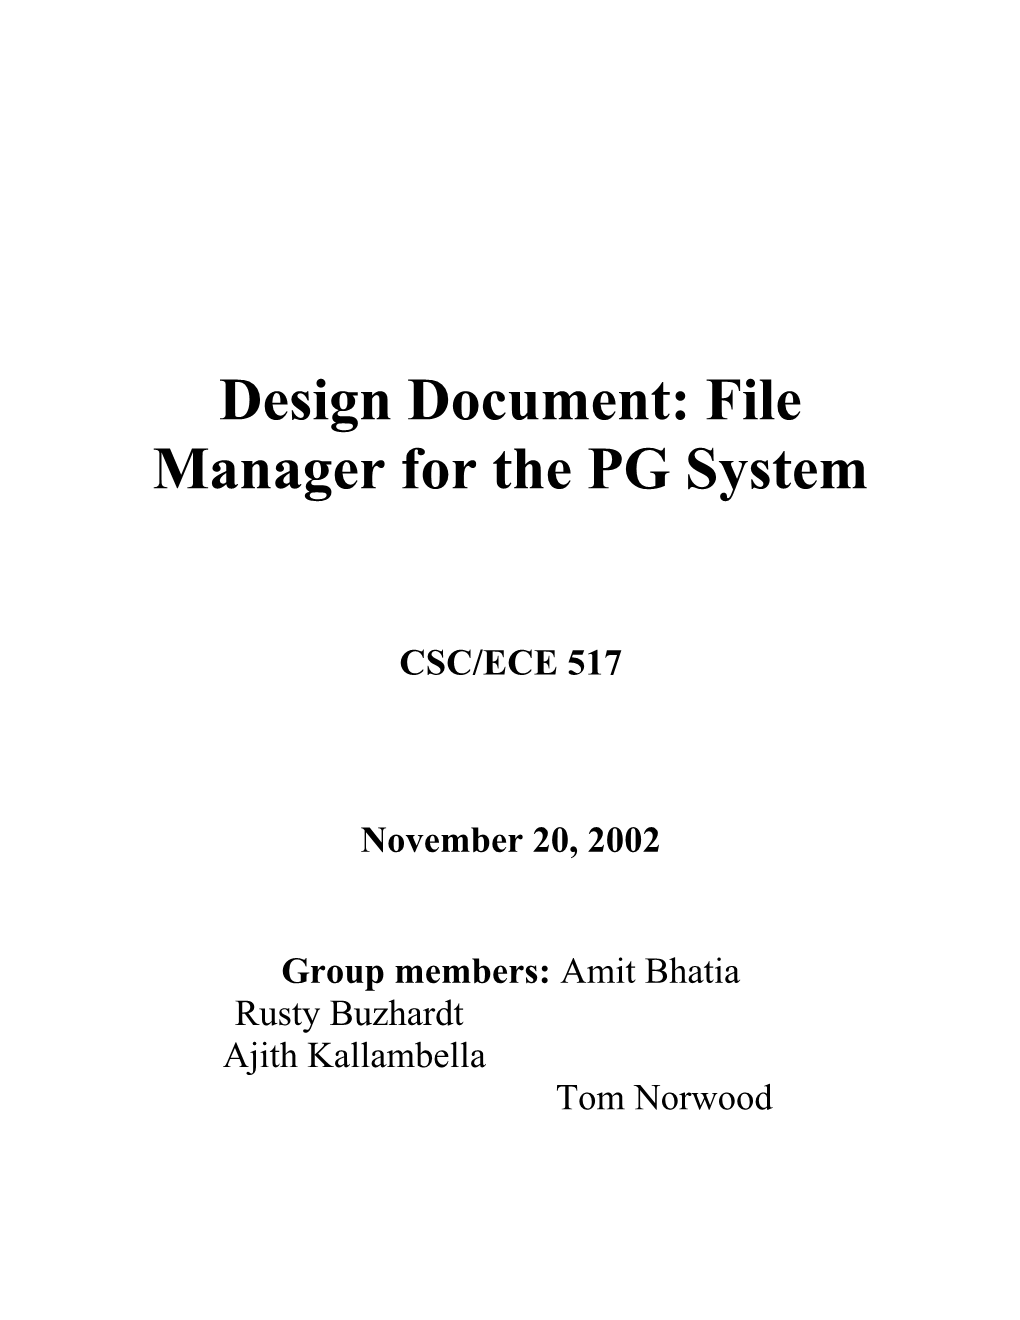 Design Document: File Manager for the PG System